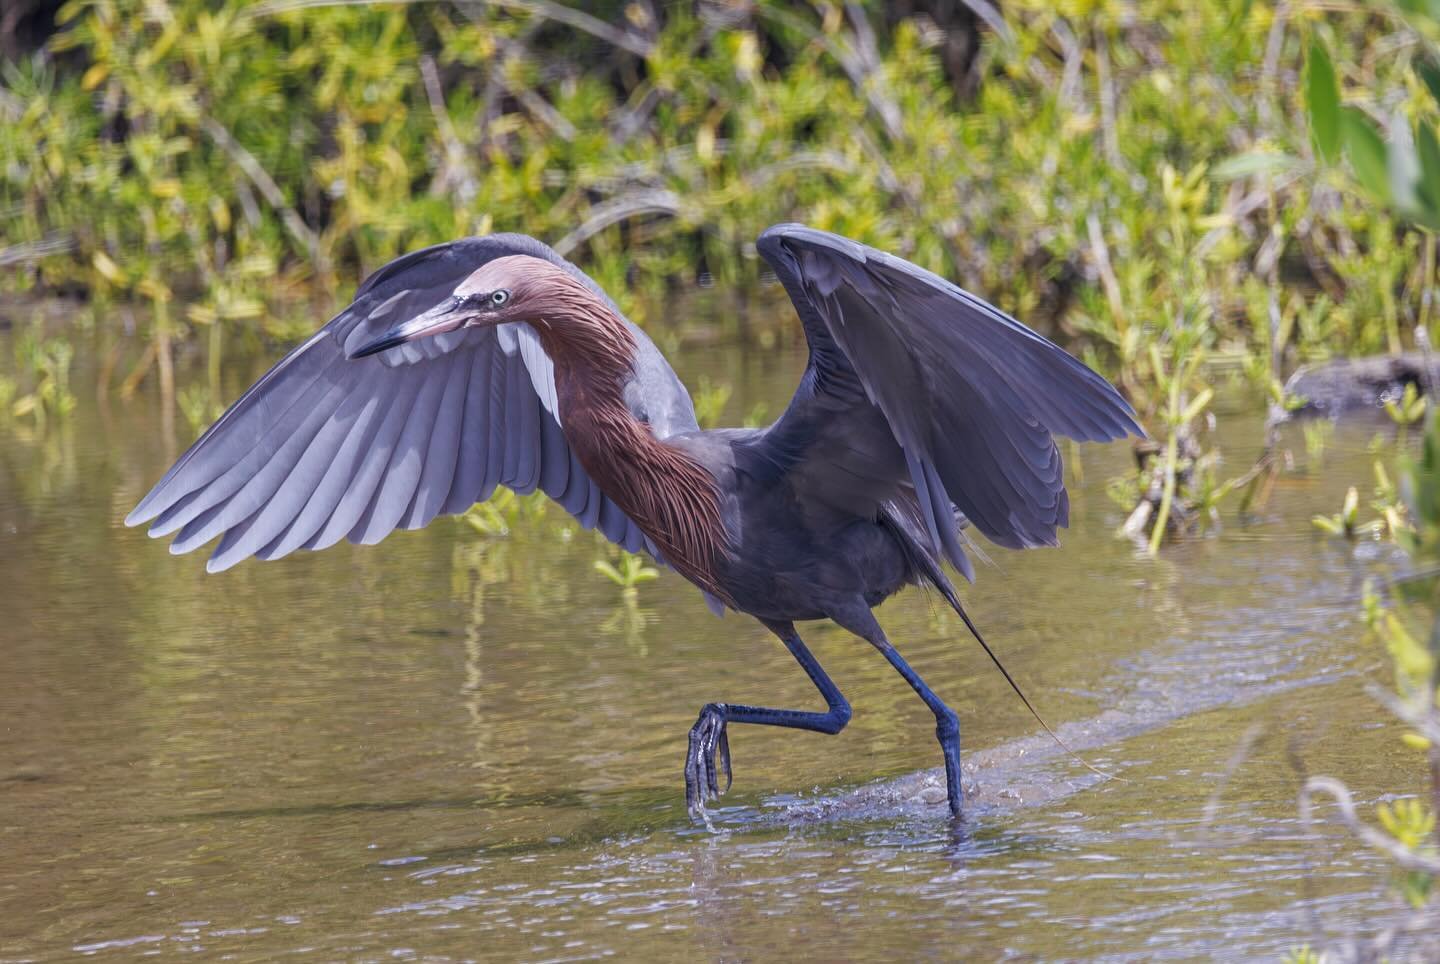 Dance of the Reddish Egret 🕺💃🪩

This Egret has the moves! Though this display isn&rsquo;t just for show, it&rsquo;s a fishy disco that lures out delicious lunch. 

#cozumel #lunchdisco #reddishegret #wildlifephotography #mexico #birdidtheword #bir